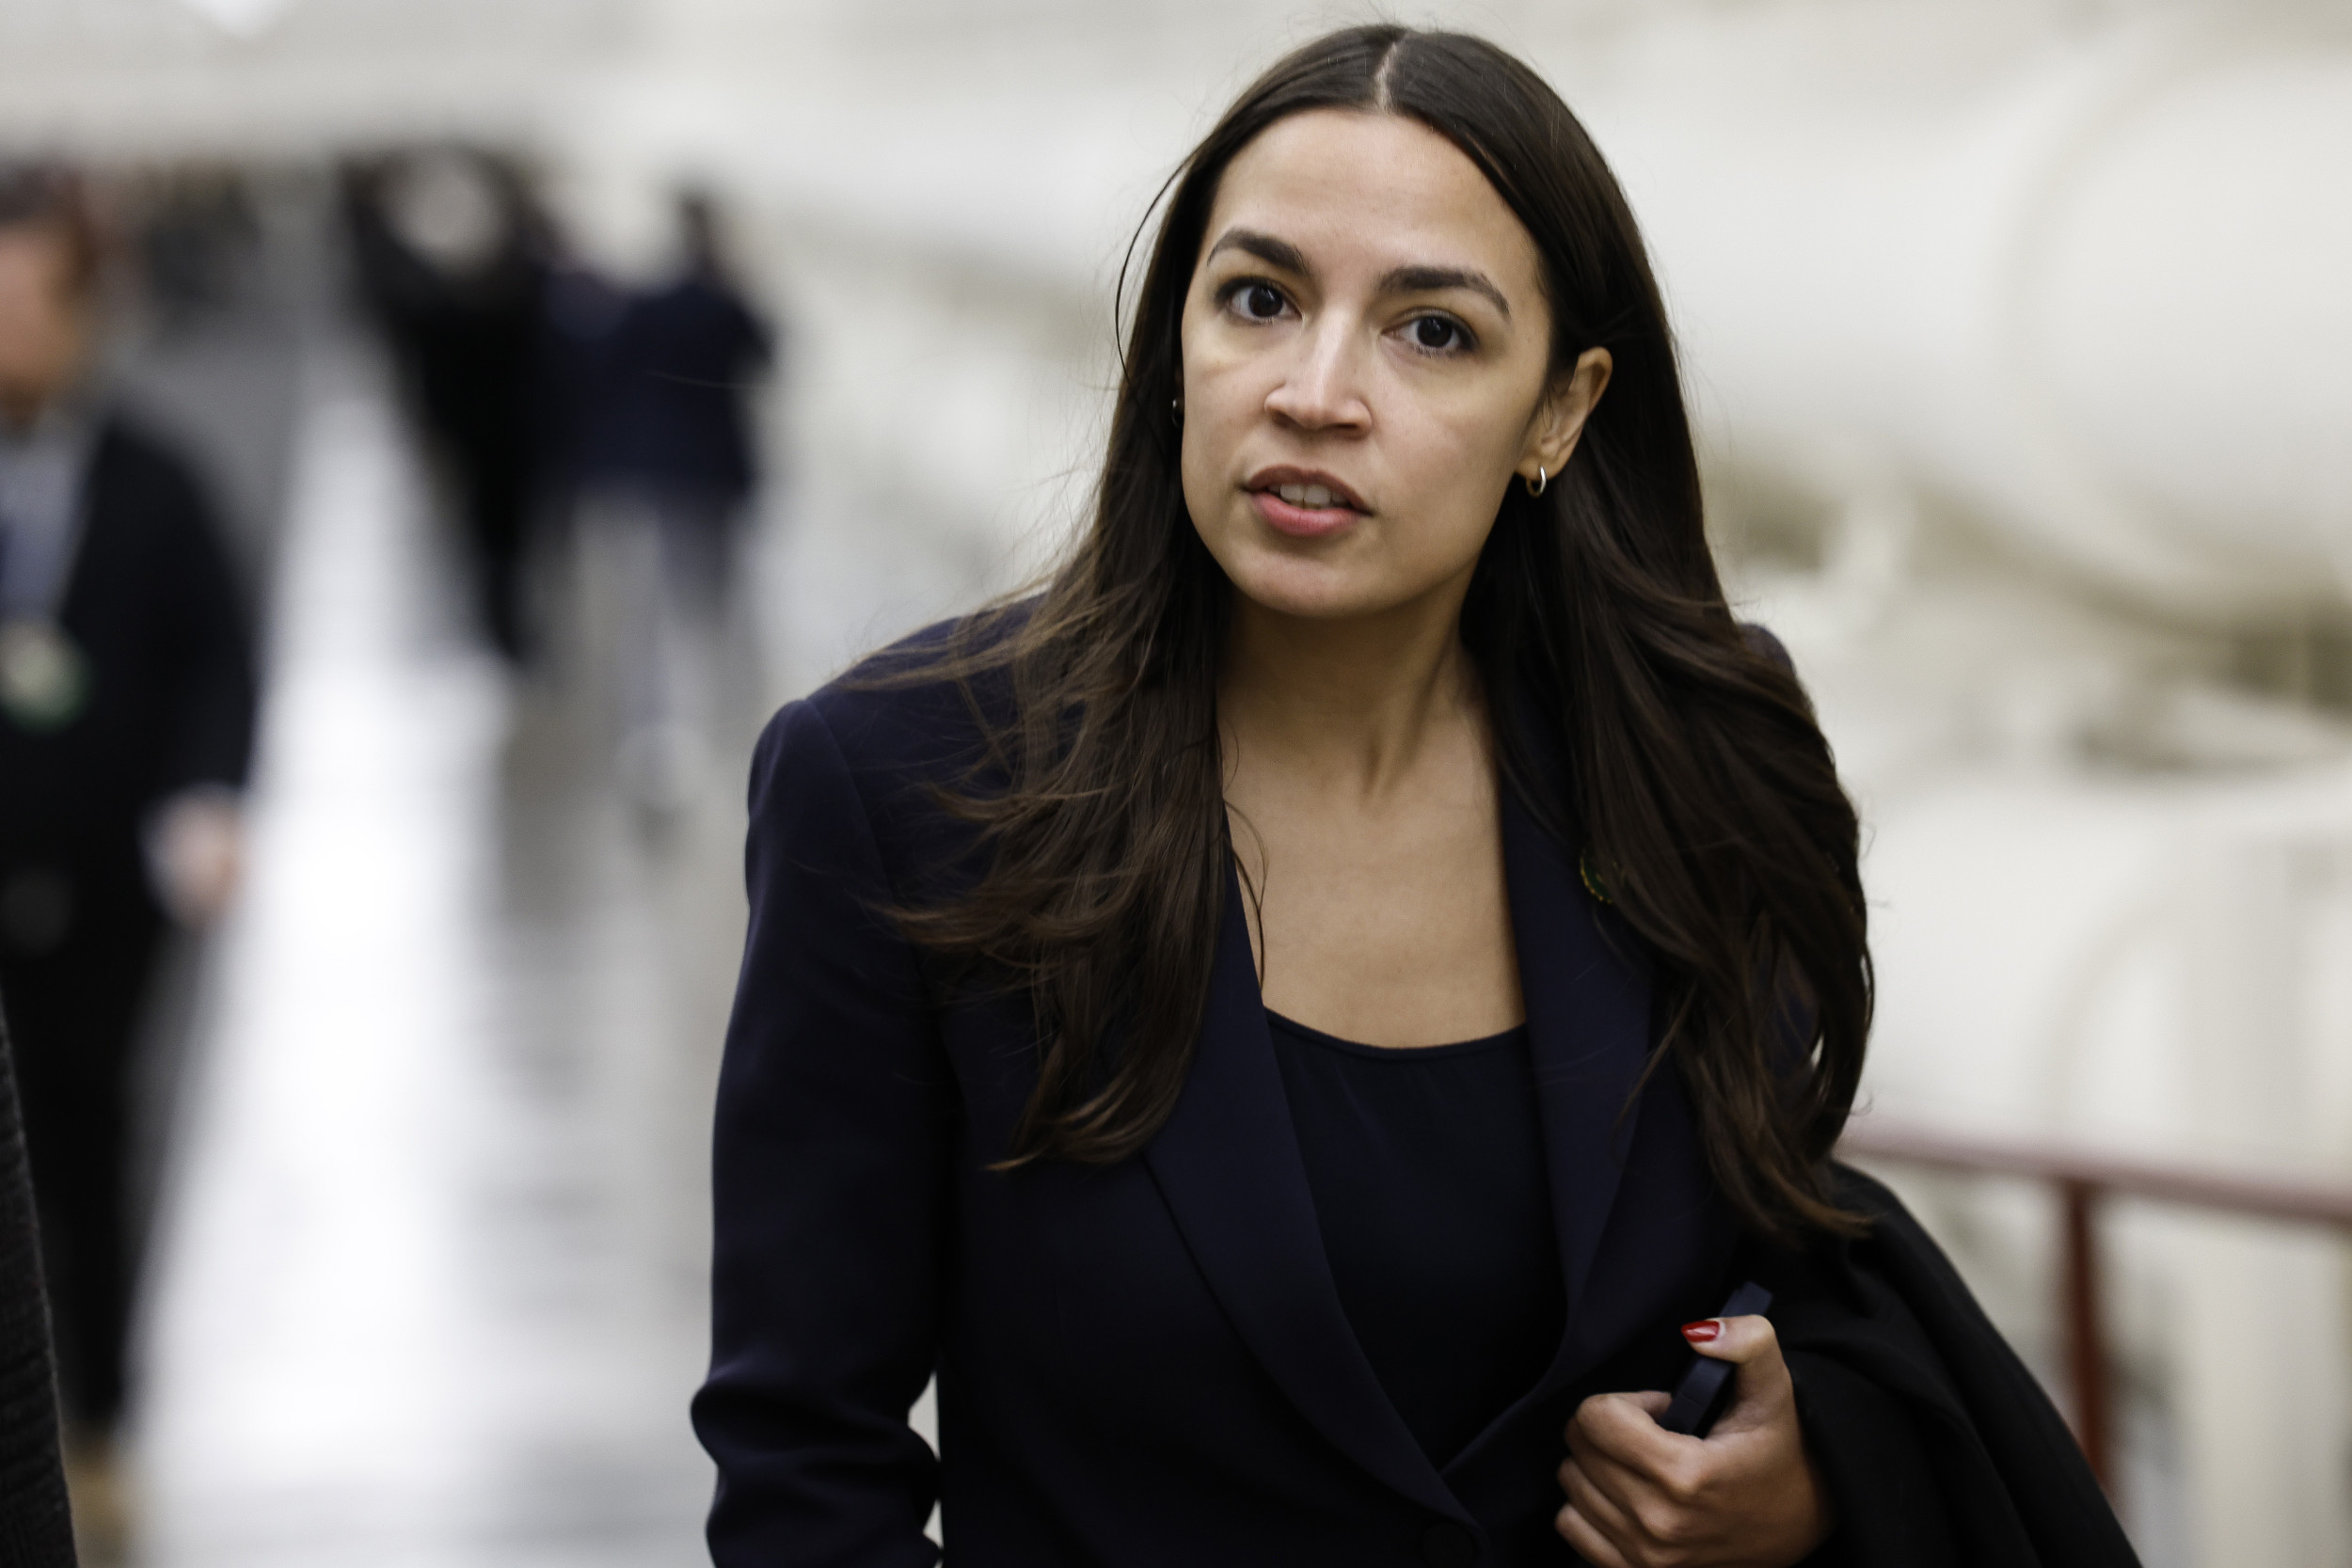 AOC Was Offered $100,000 by AIPAC. She Turned Them Down.